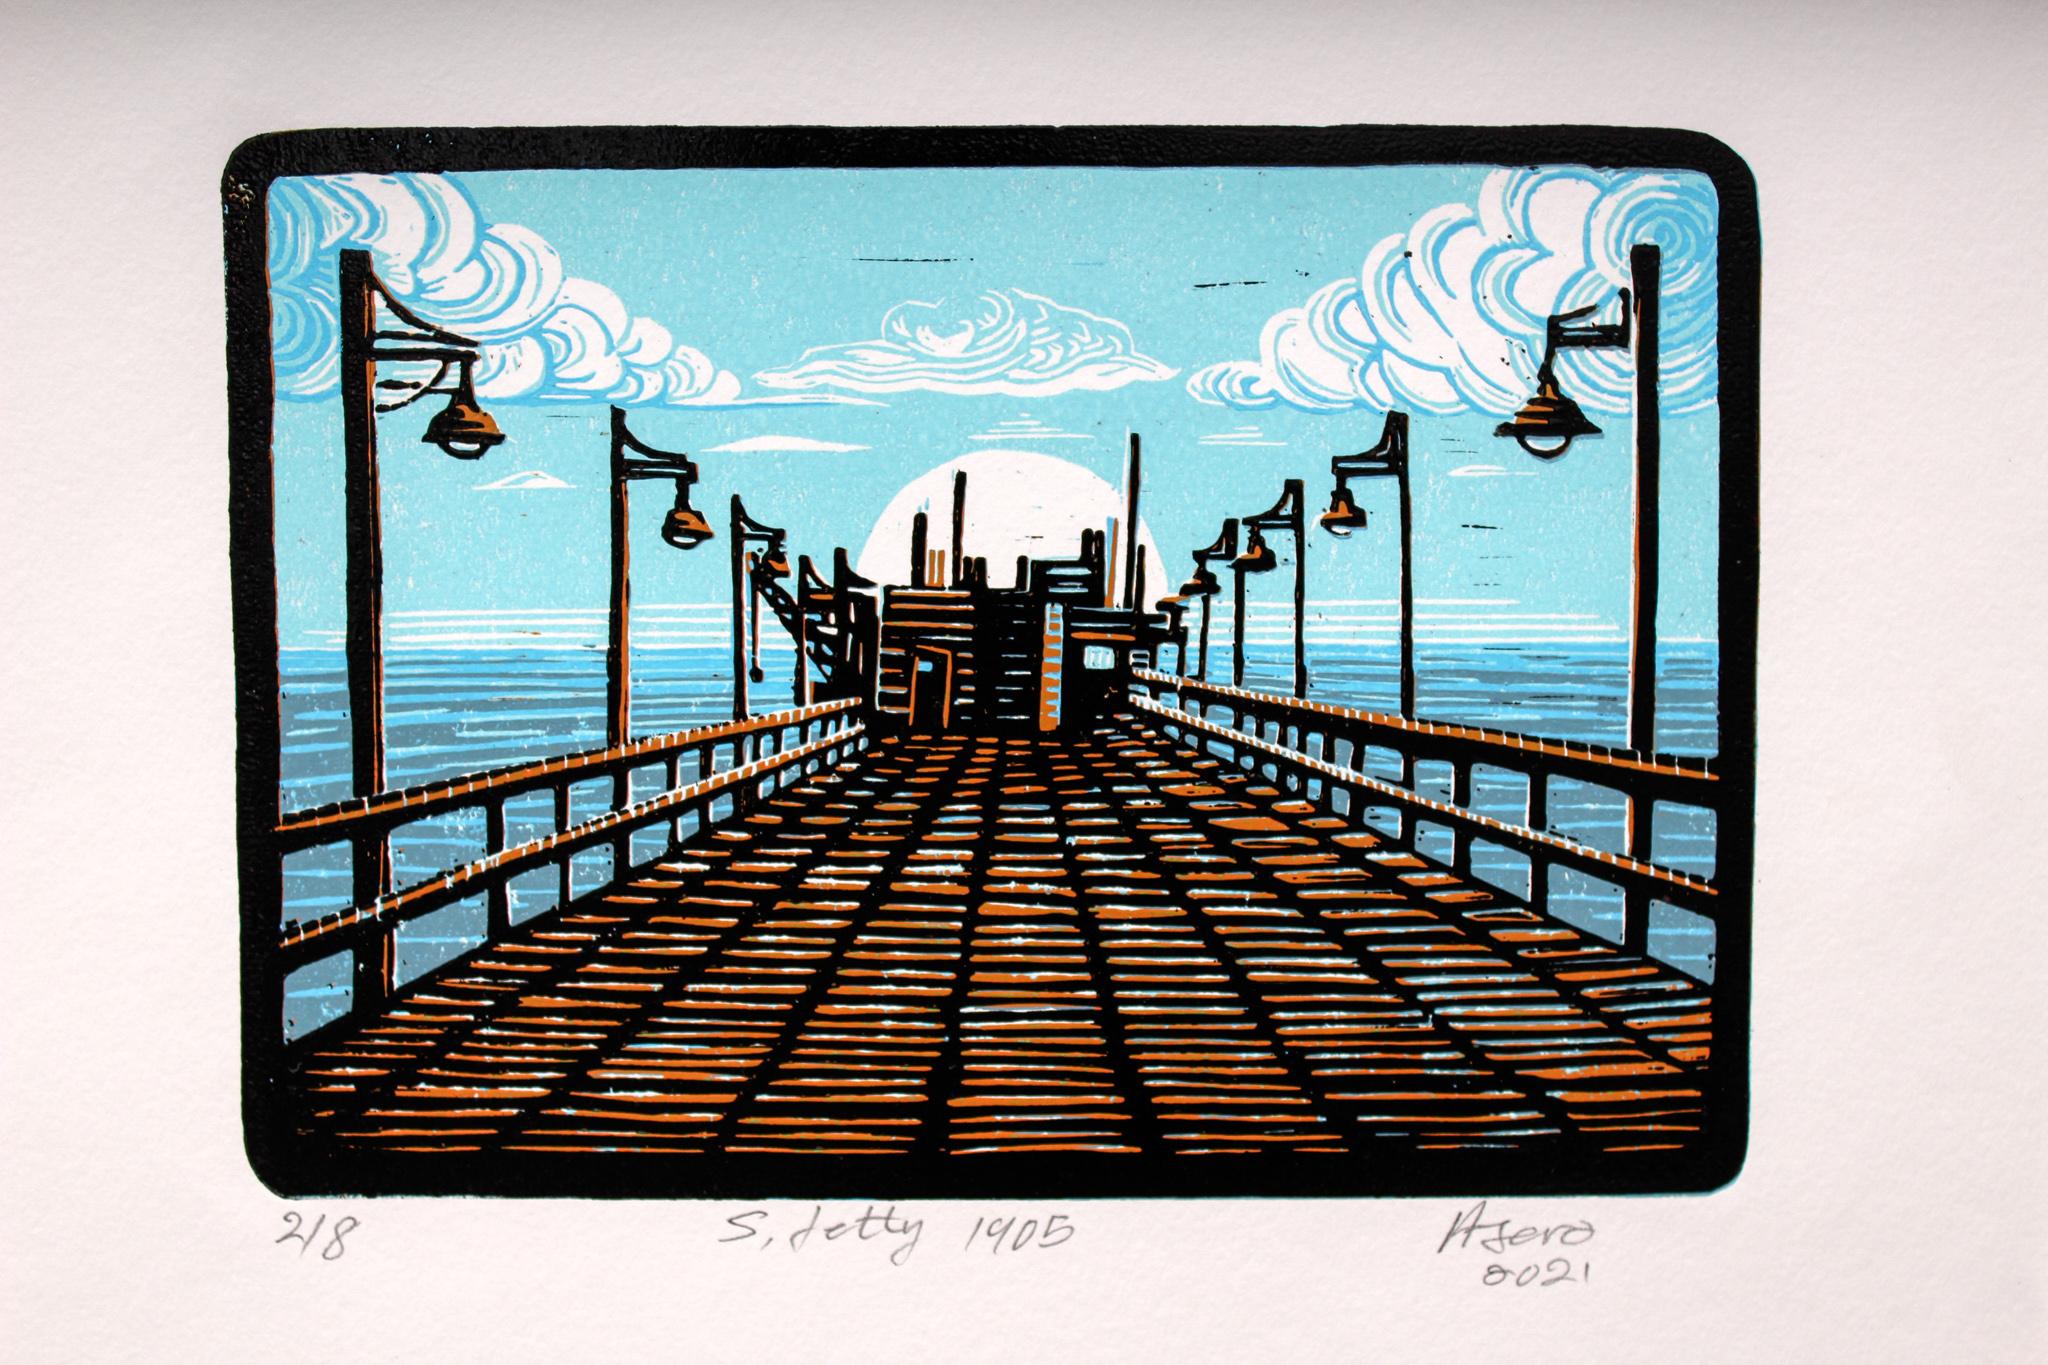 S. Jetty 1905, 2021. Linoleum block print on fabriano paper, edition of 8

Petrus Amuthenu was born in Swakopmund and grew up in northern Namibia in Uukwaludhi. In 2002 a chance encounter with the late artist Samuel Mbingilo at the Katutura